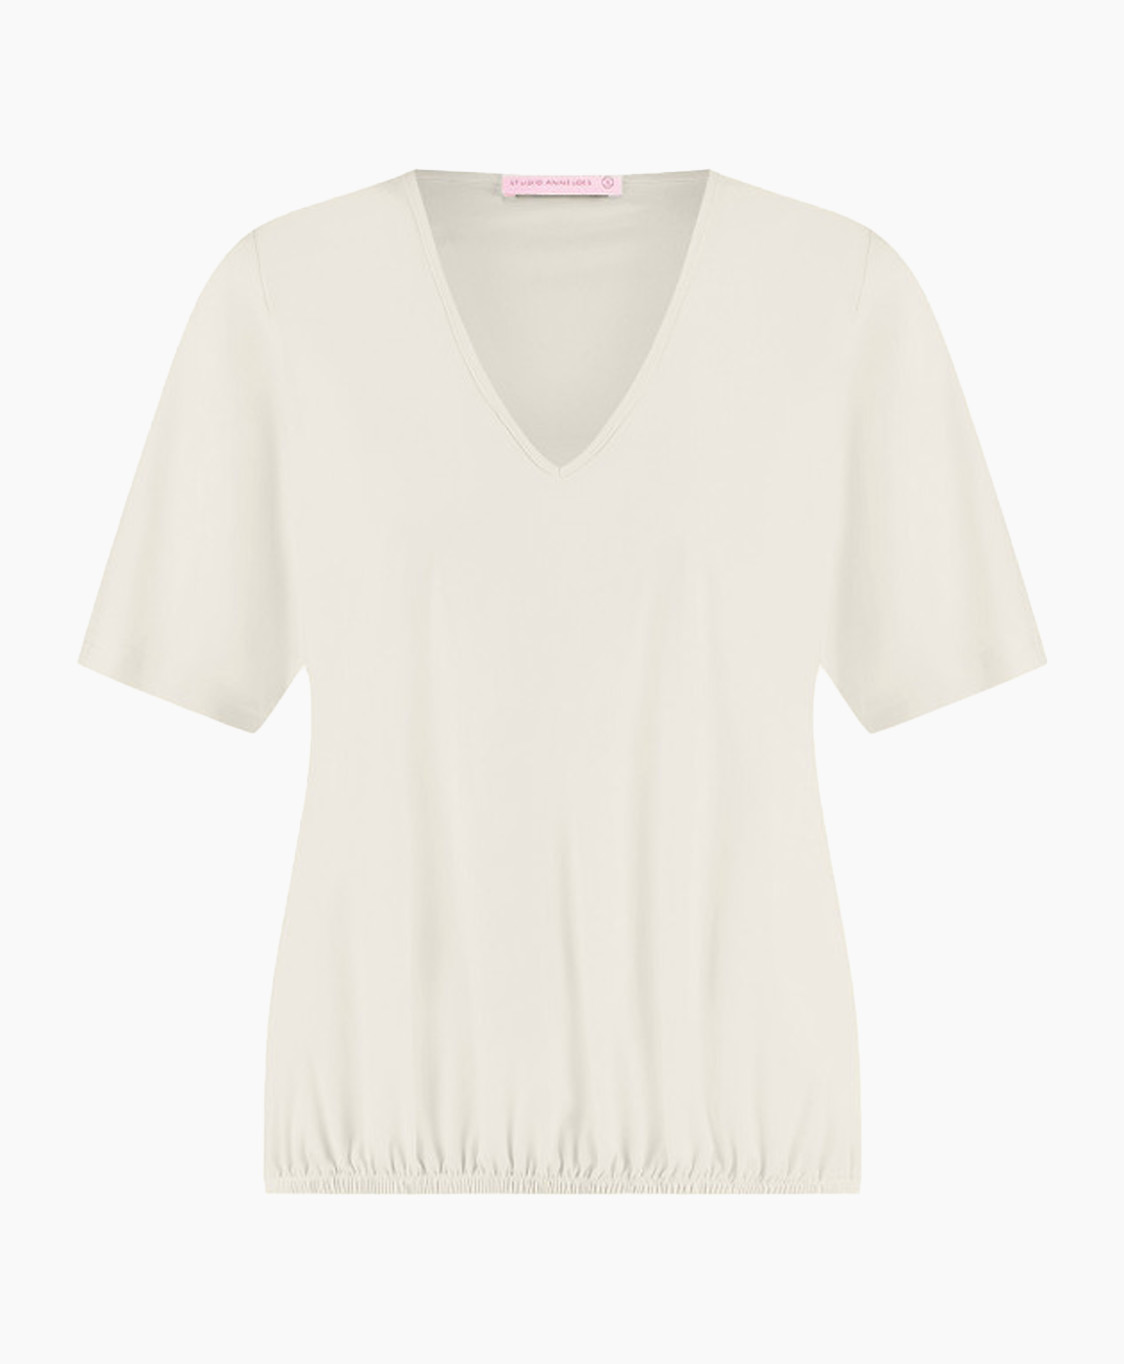 Studio Anneloes Top & T-shirt Vicky Shirt Off White